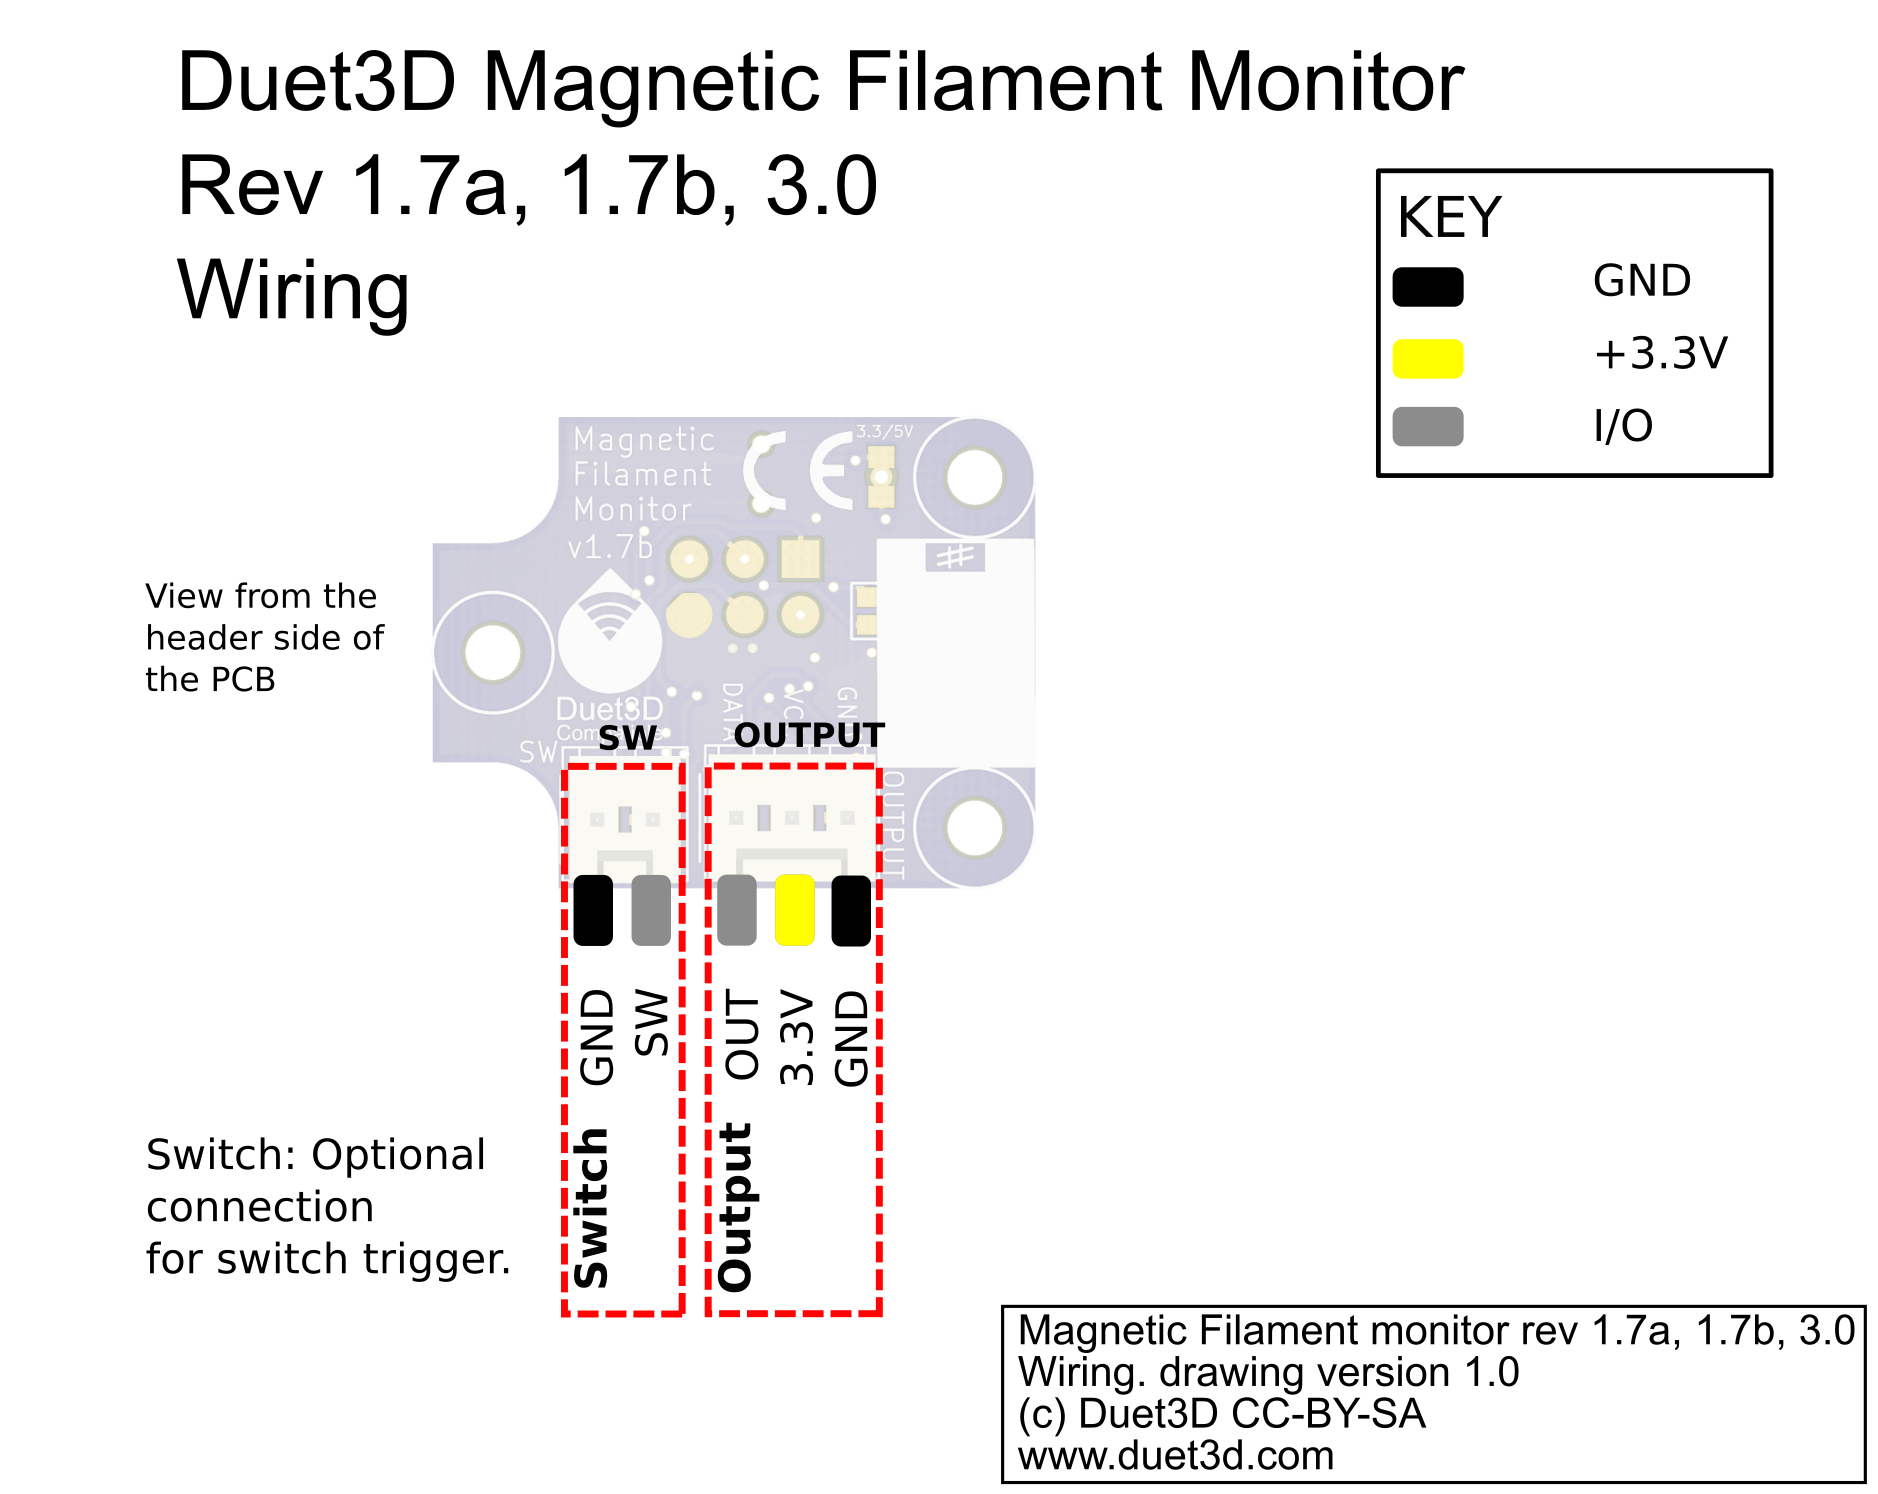 Wiring for the Rotating Magnet Filament monitor version 3.0, 1.7b and v1.7a